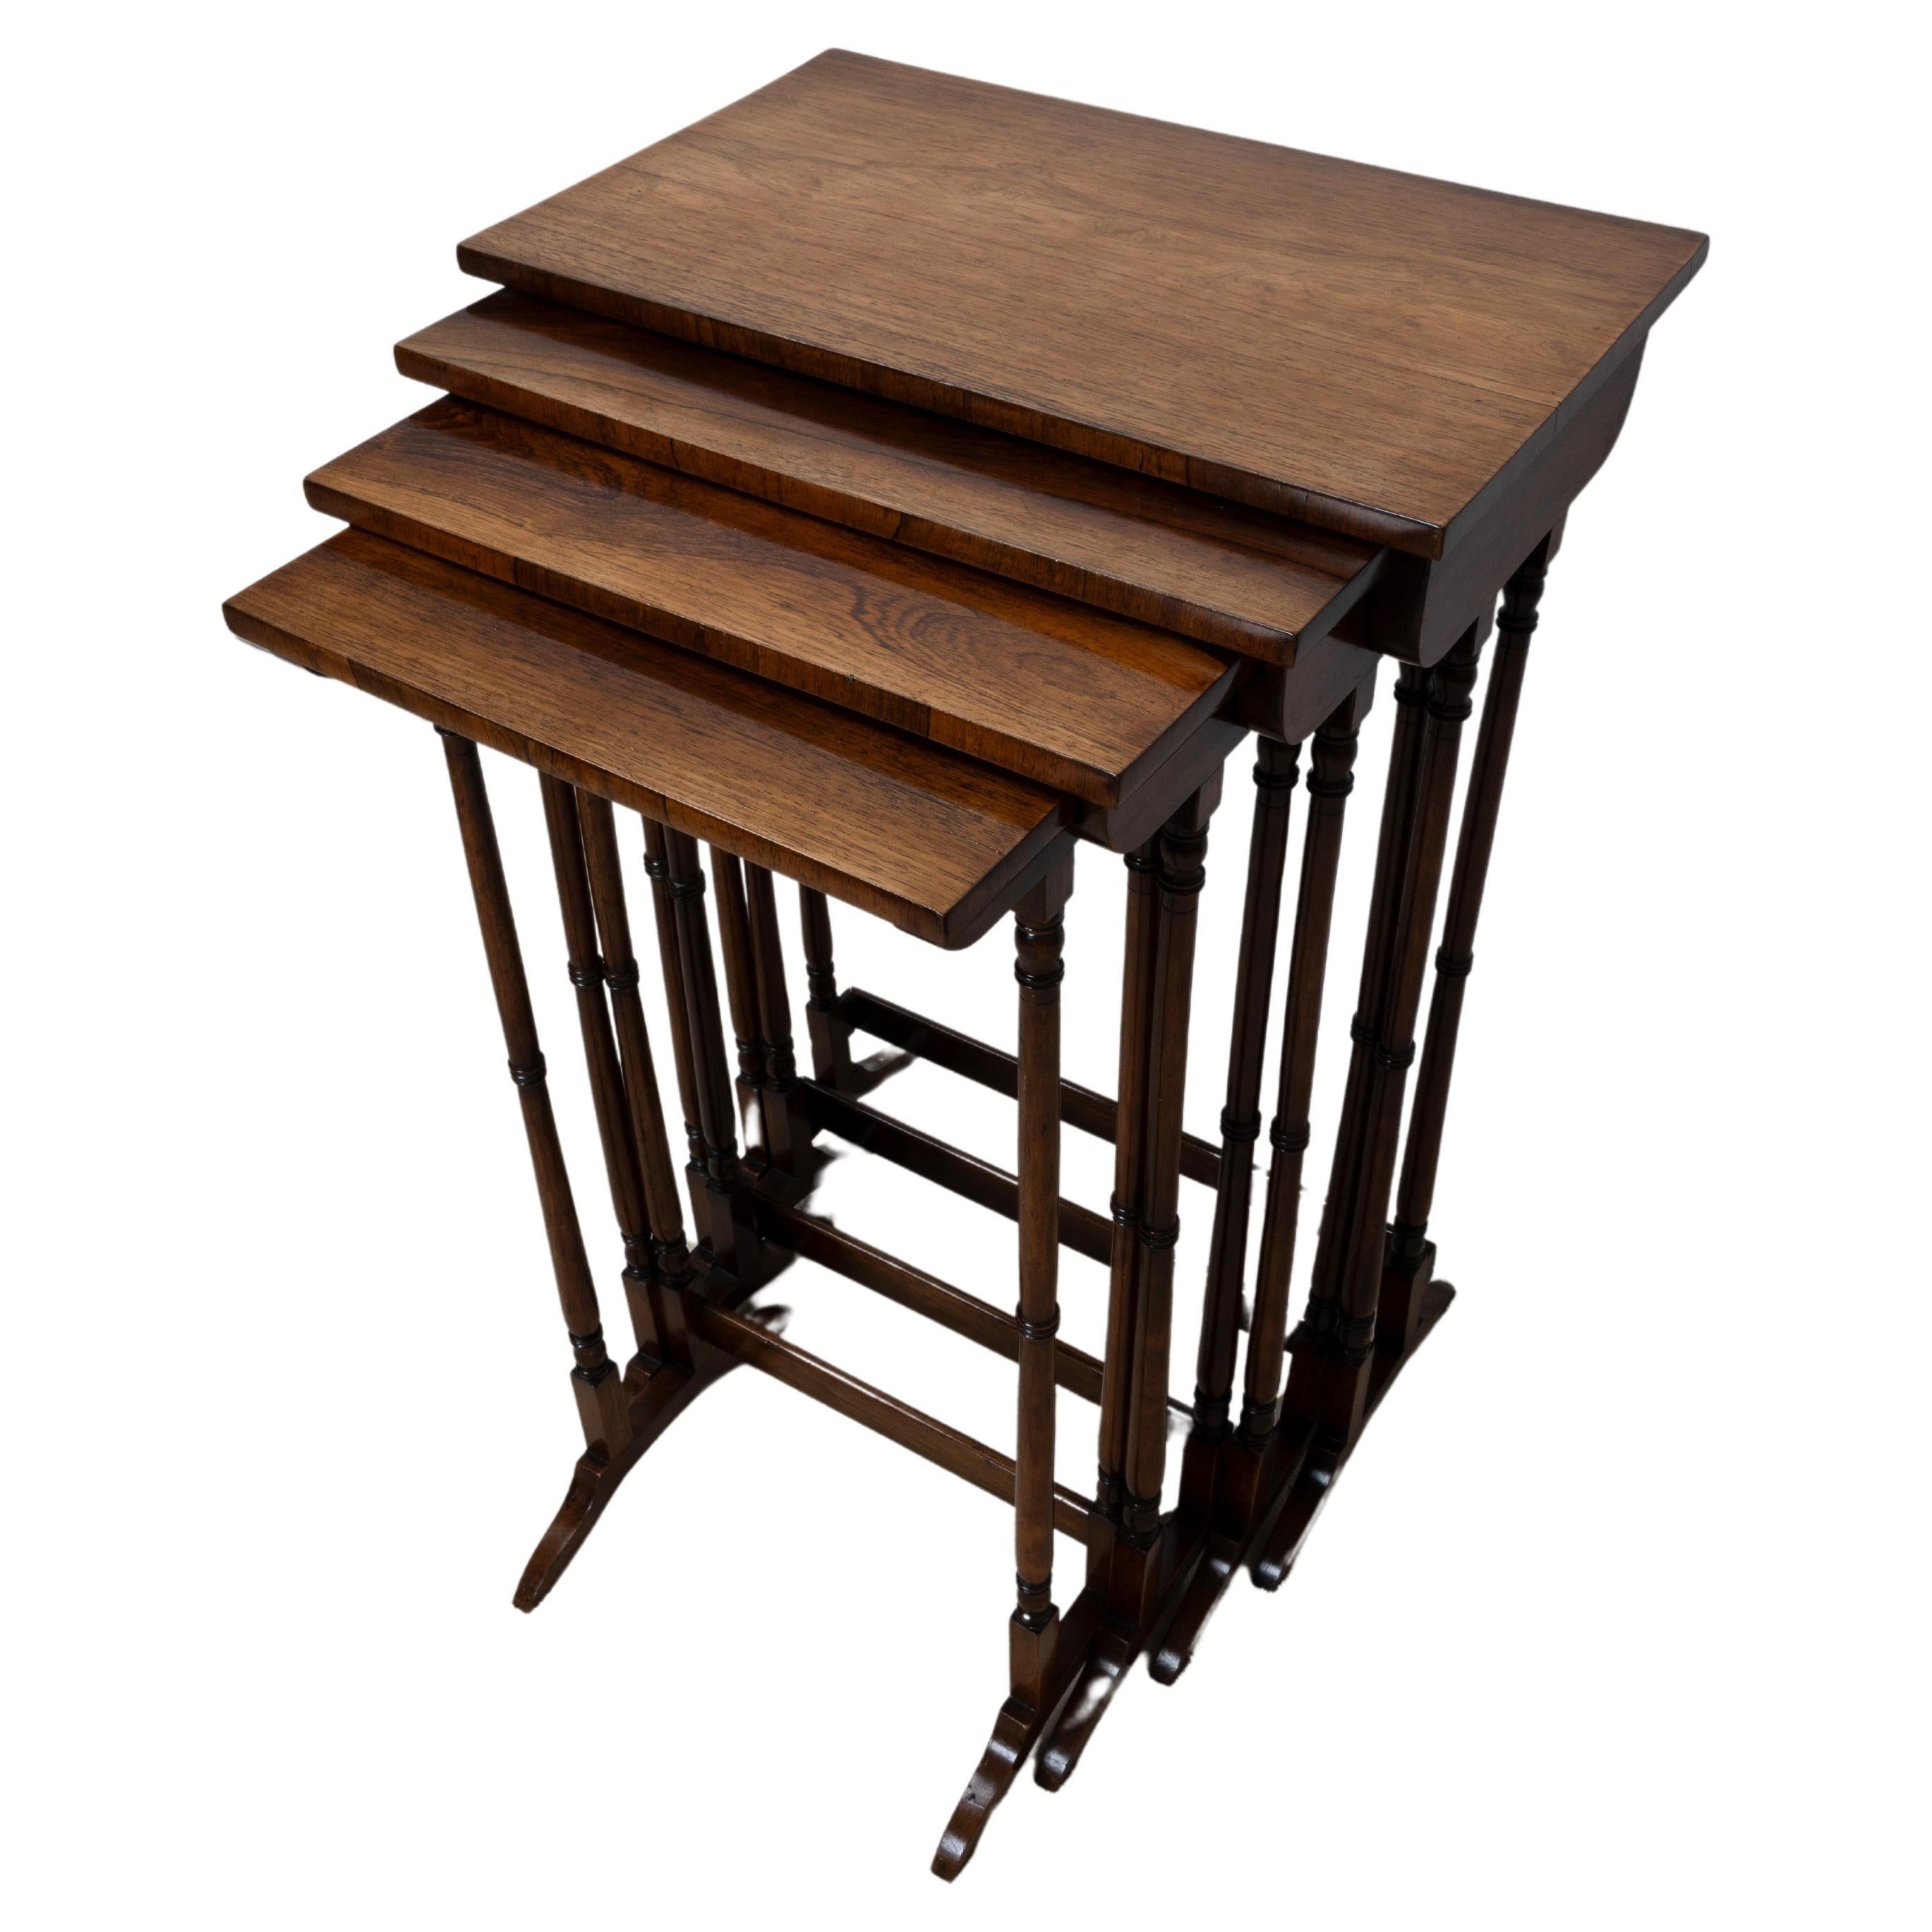 A REGENCY NEST OF ROSEWOOD QUARTETTO TABLES
EARLY 19TH CENTURY C.1820
Each of graduated size, on turned supports and splayed feet, joined by a stretcher
The cabinet maker George Smith stated that such tables were ‘placed in the drawing room so the